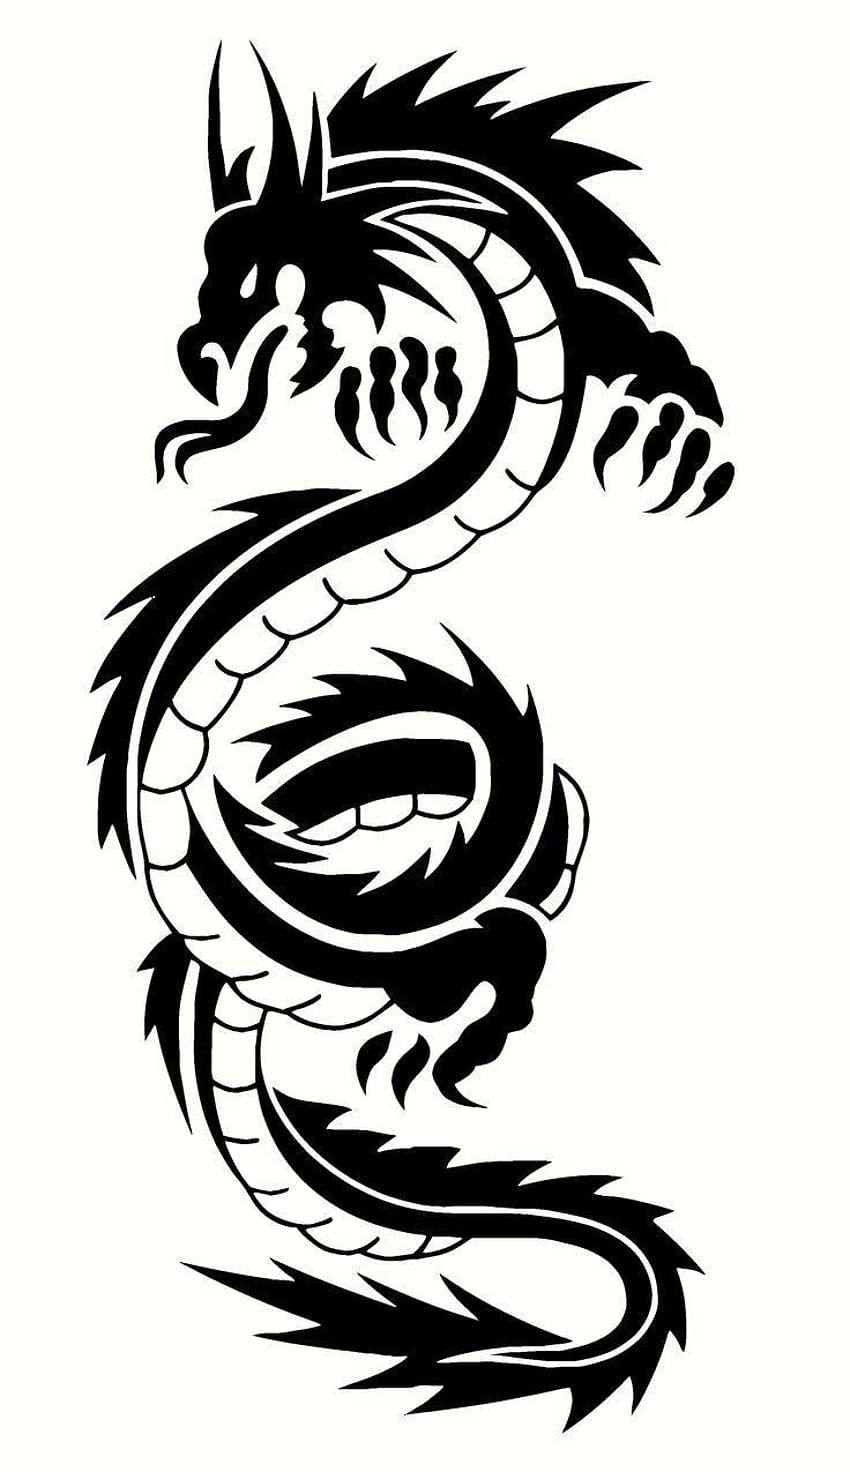 Stylized Dragon Spiral Tattoos Set Of Black And White Vector  Illustrations Royalty Free SVG Cliparts Vectors And Stock Illustration  Image 25515924